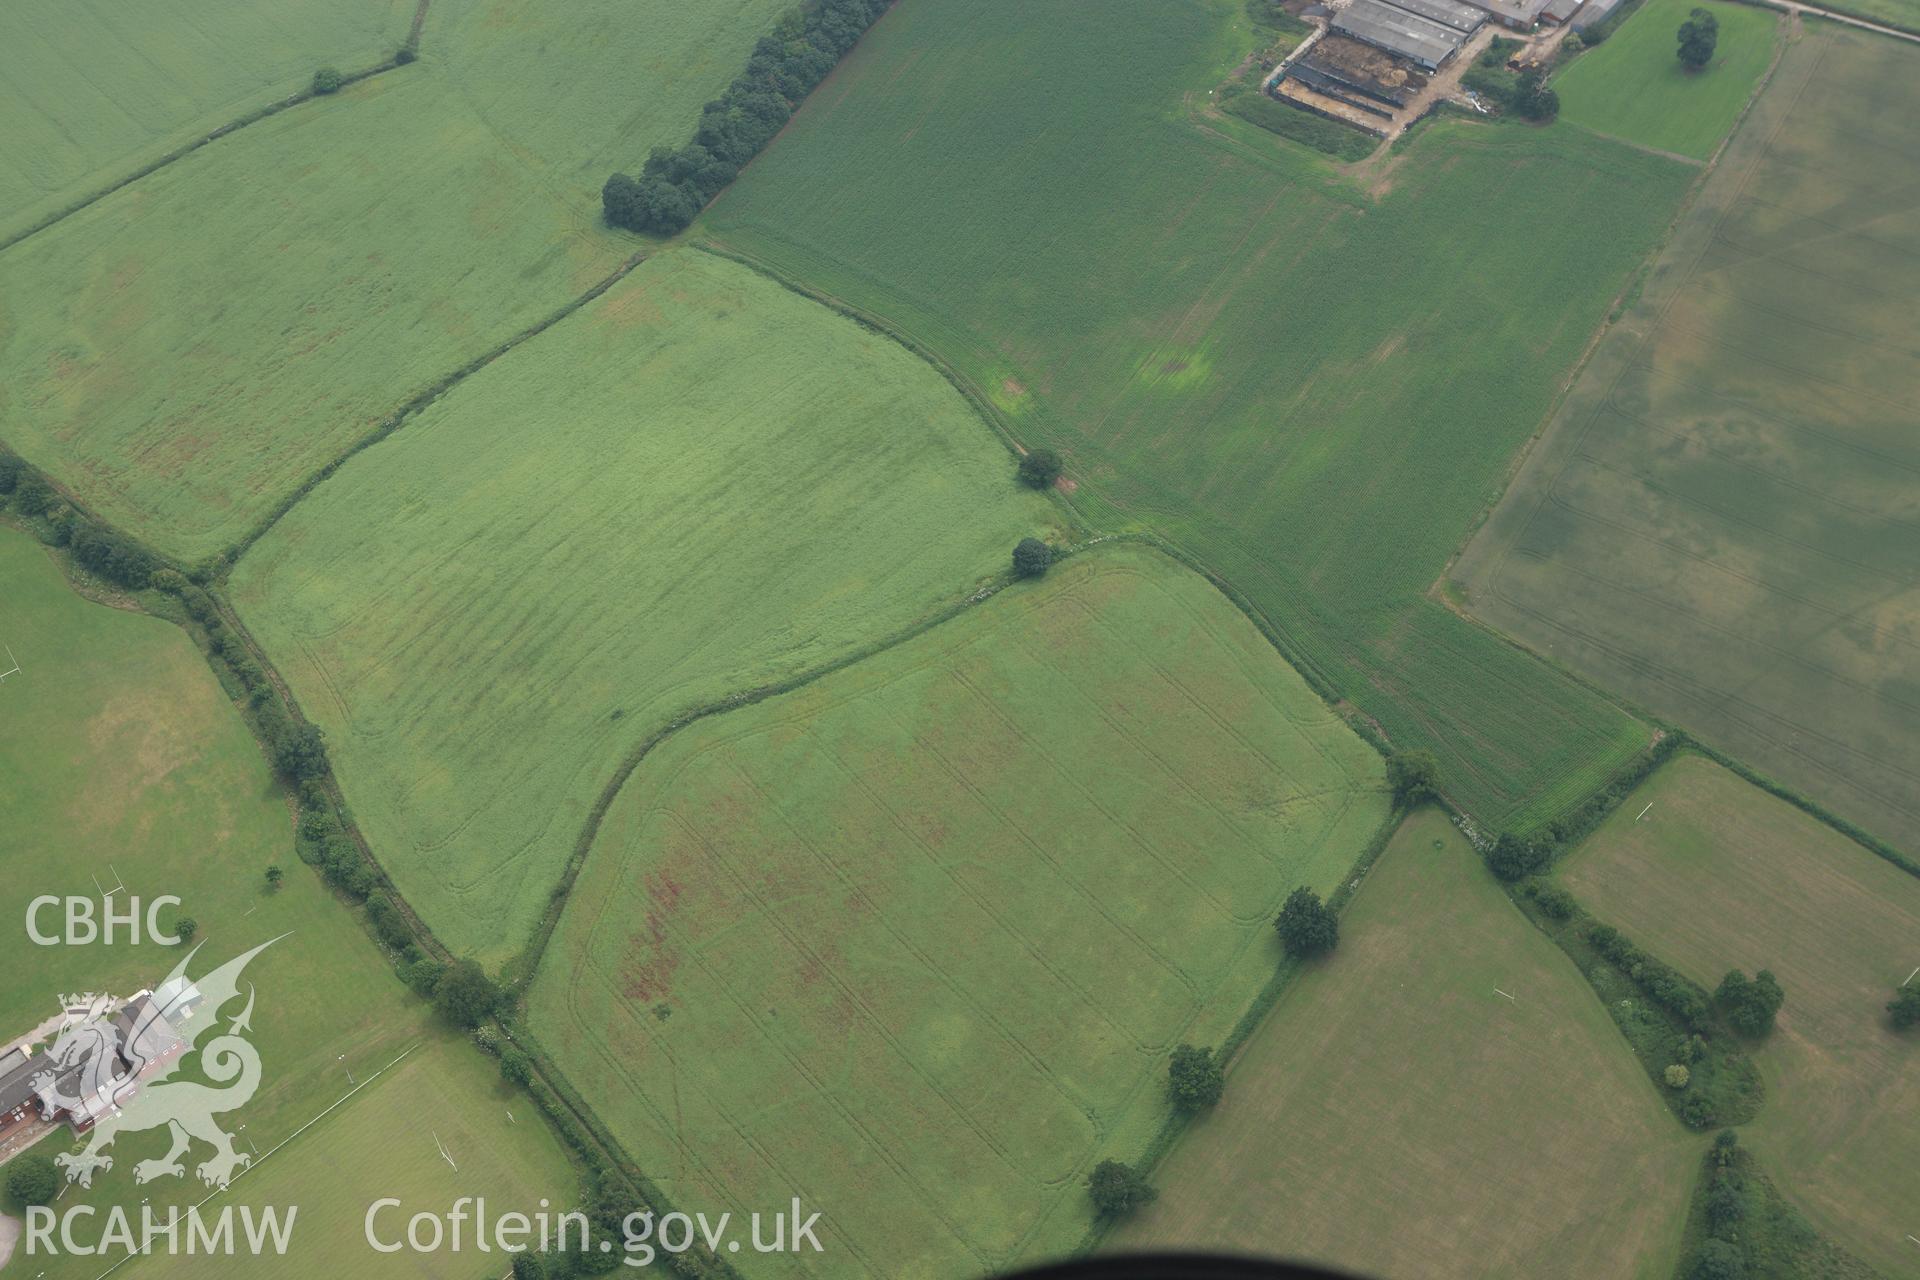 RCAHMW colour oblique aerial photograph of cropmarks northwest of Llwyn Knottia. Taken on 29 June 2009 by Toby Driver